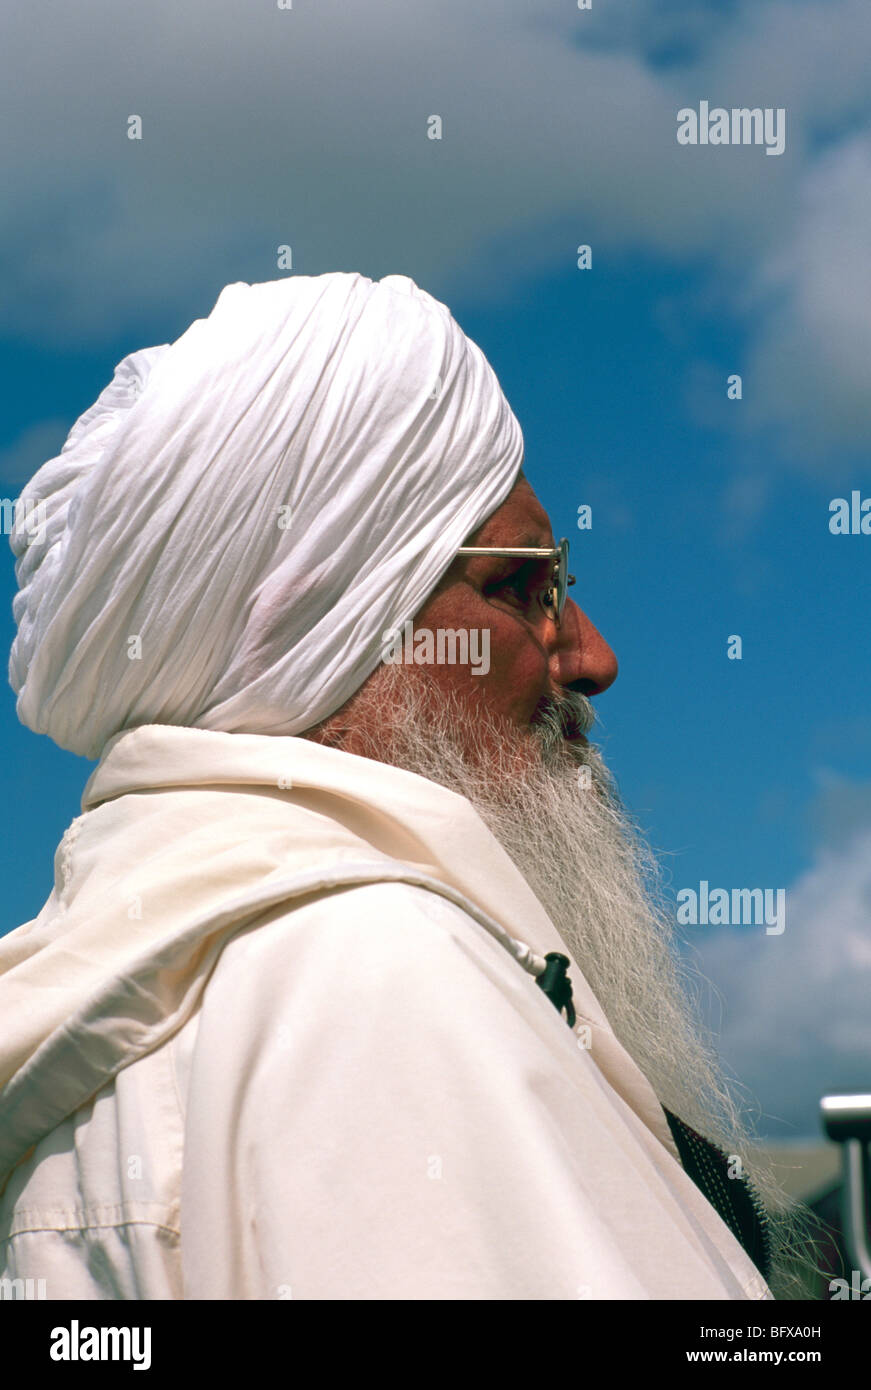 Sikh Man, Elderly East Indian / South Asian Man wearing White Turban and Traditional Clothing, Profile Stock Photo